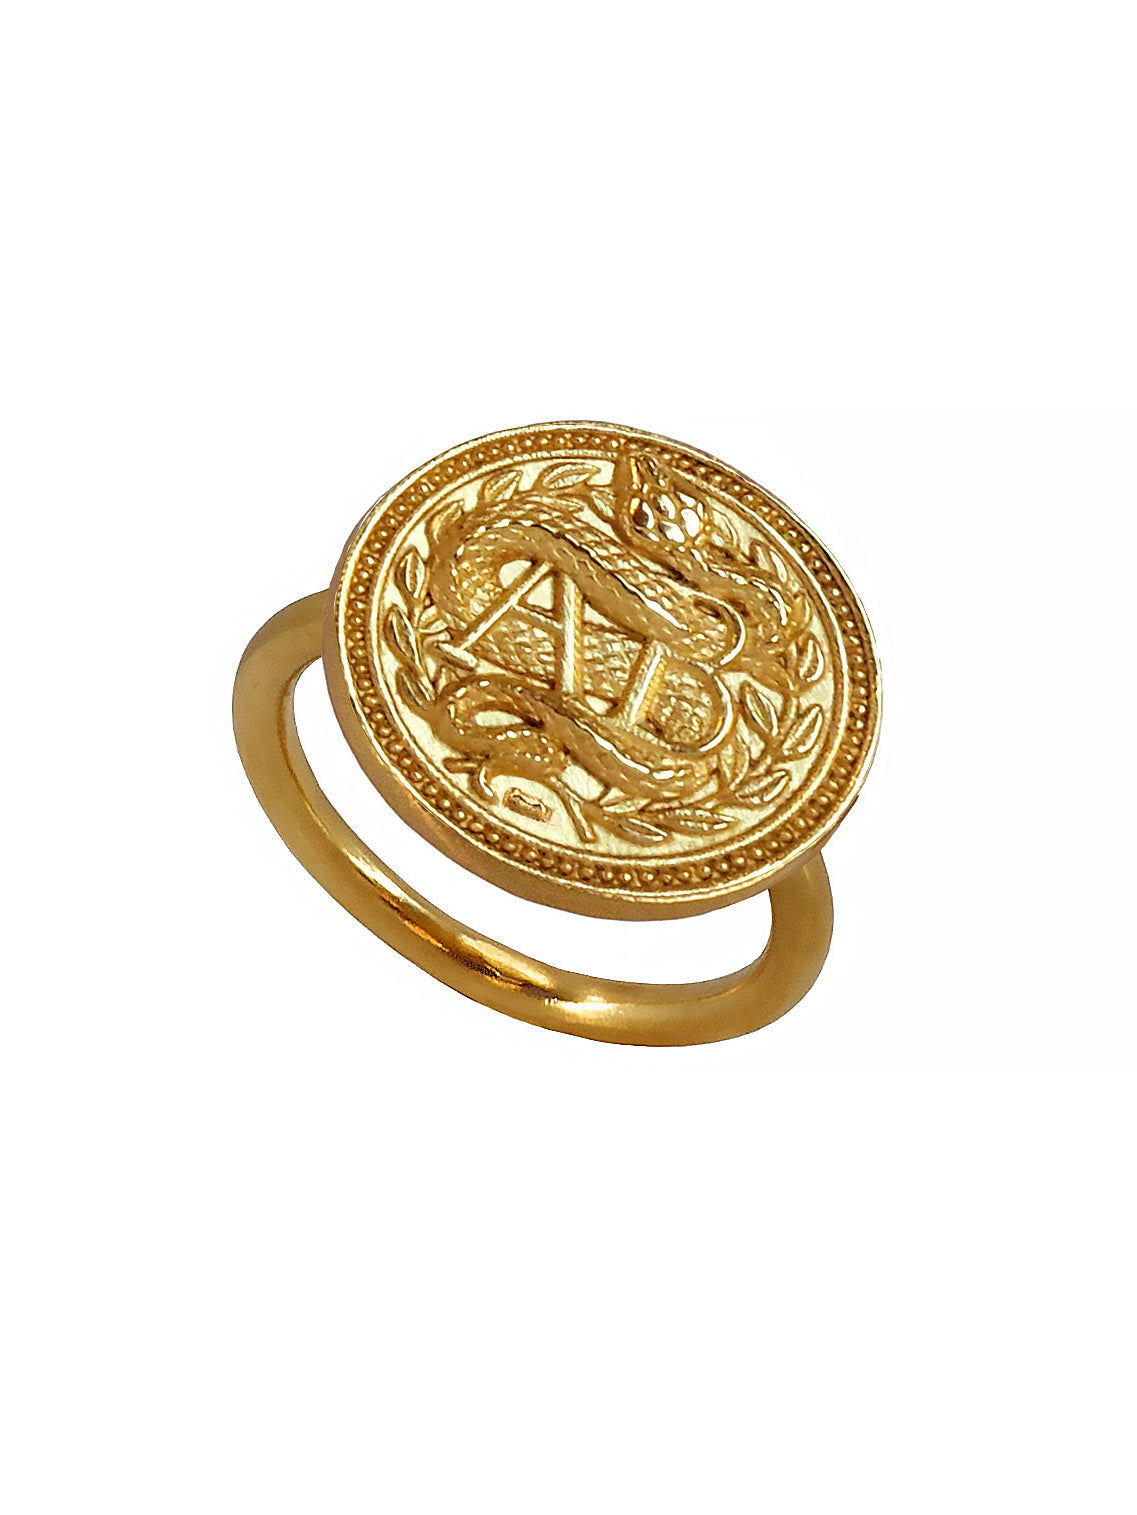 Blood type AB Negative Ring. 23ct Gold plated Sterling Silver.Grupo sanguineo Anillo, Dorado